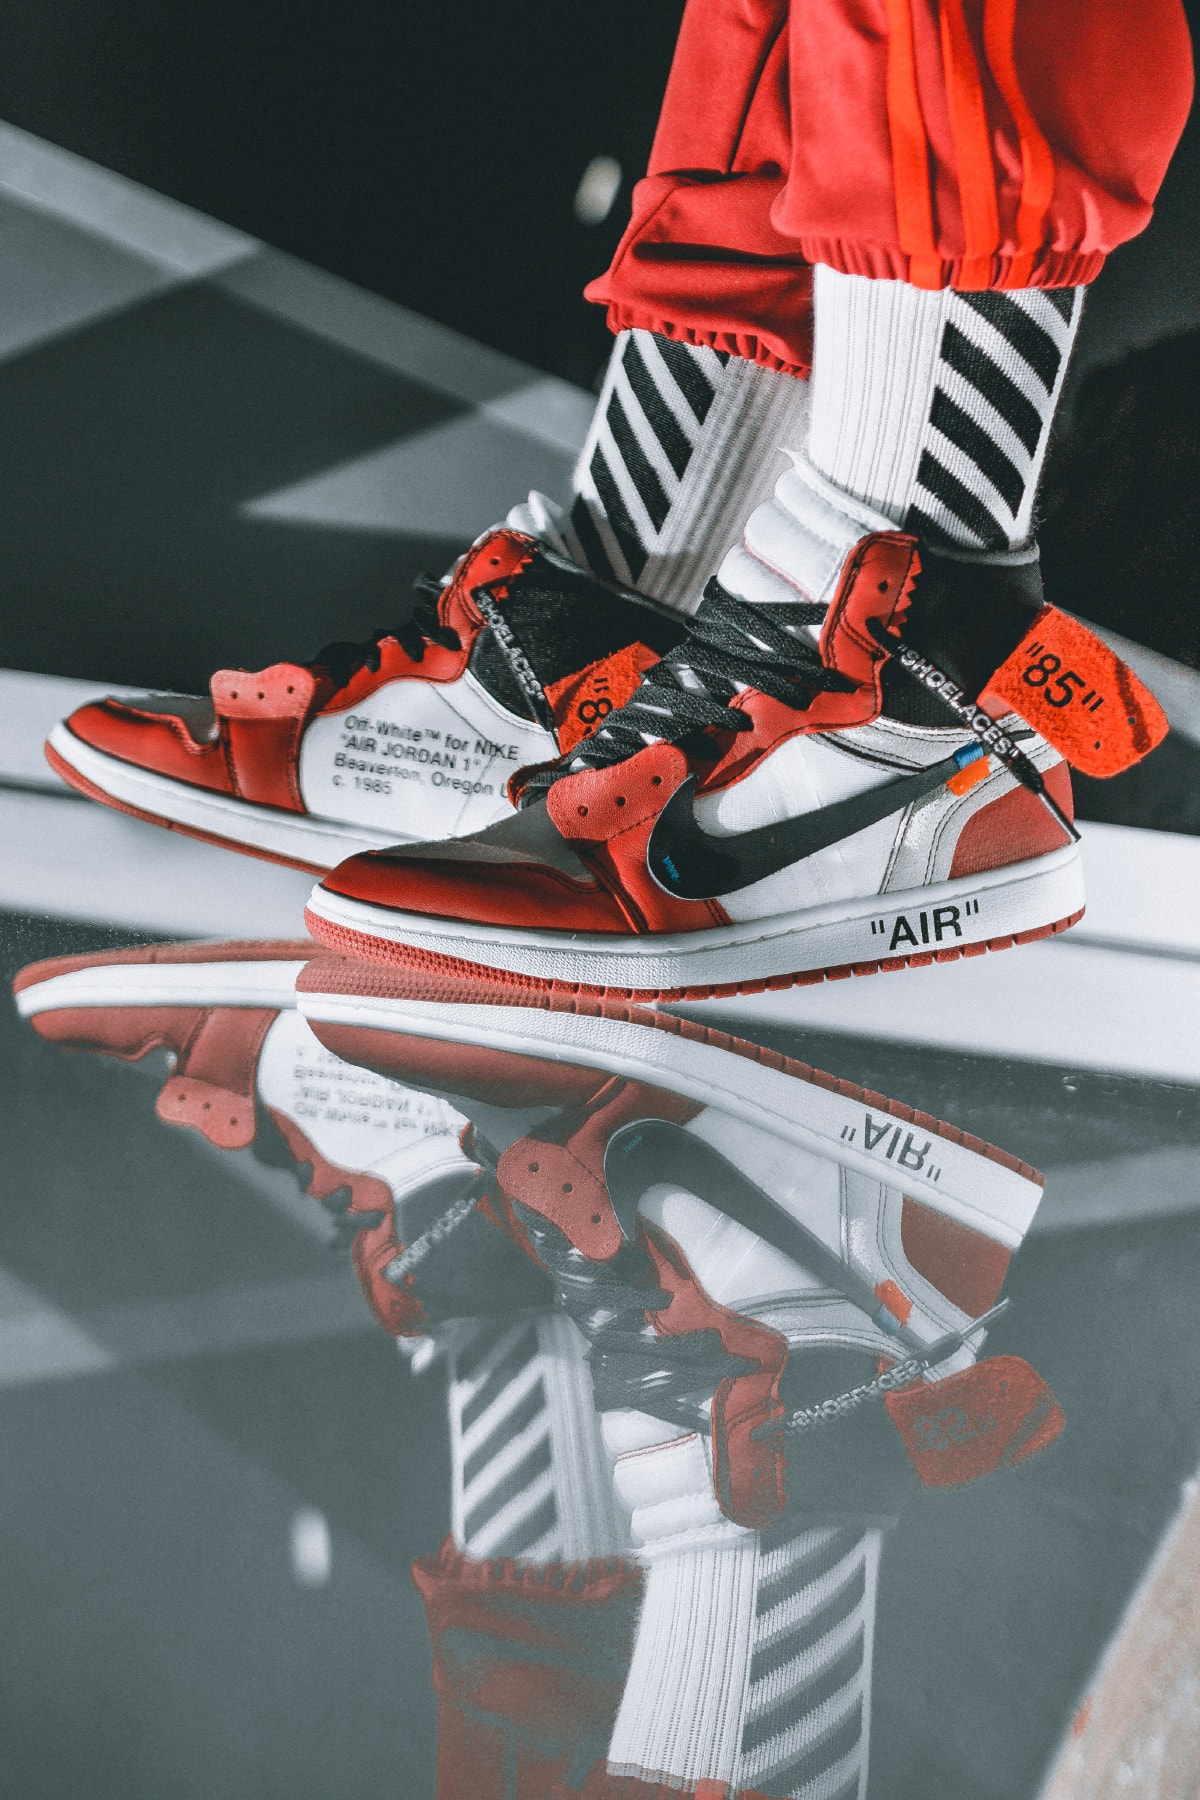 OFF-WHITE x Nike Air Force 1 “Black”: On-Foot Pictures Surfaced